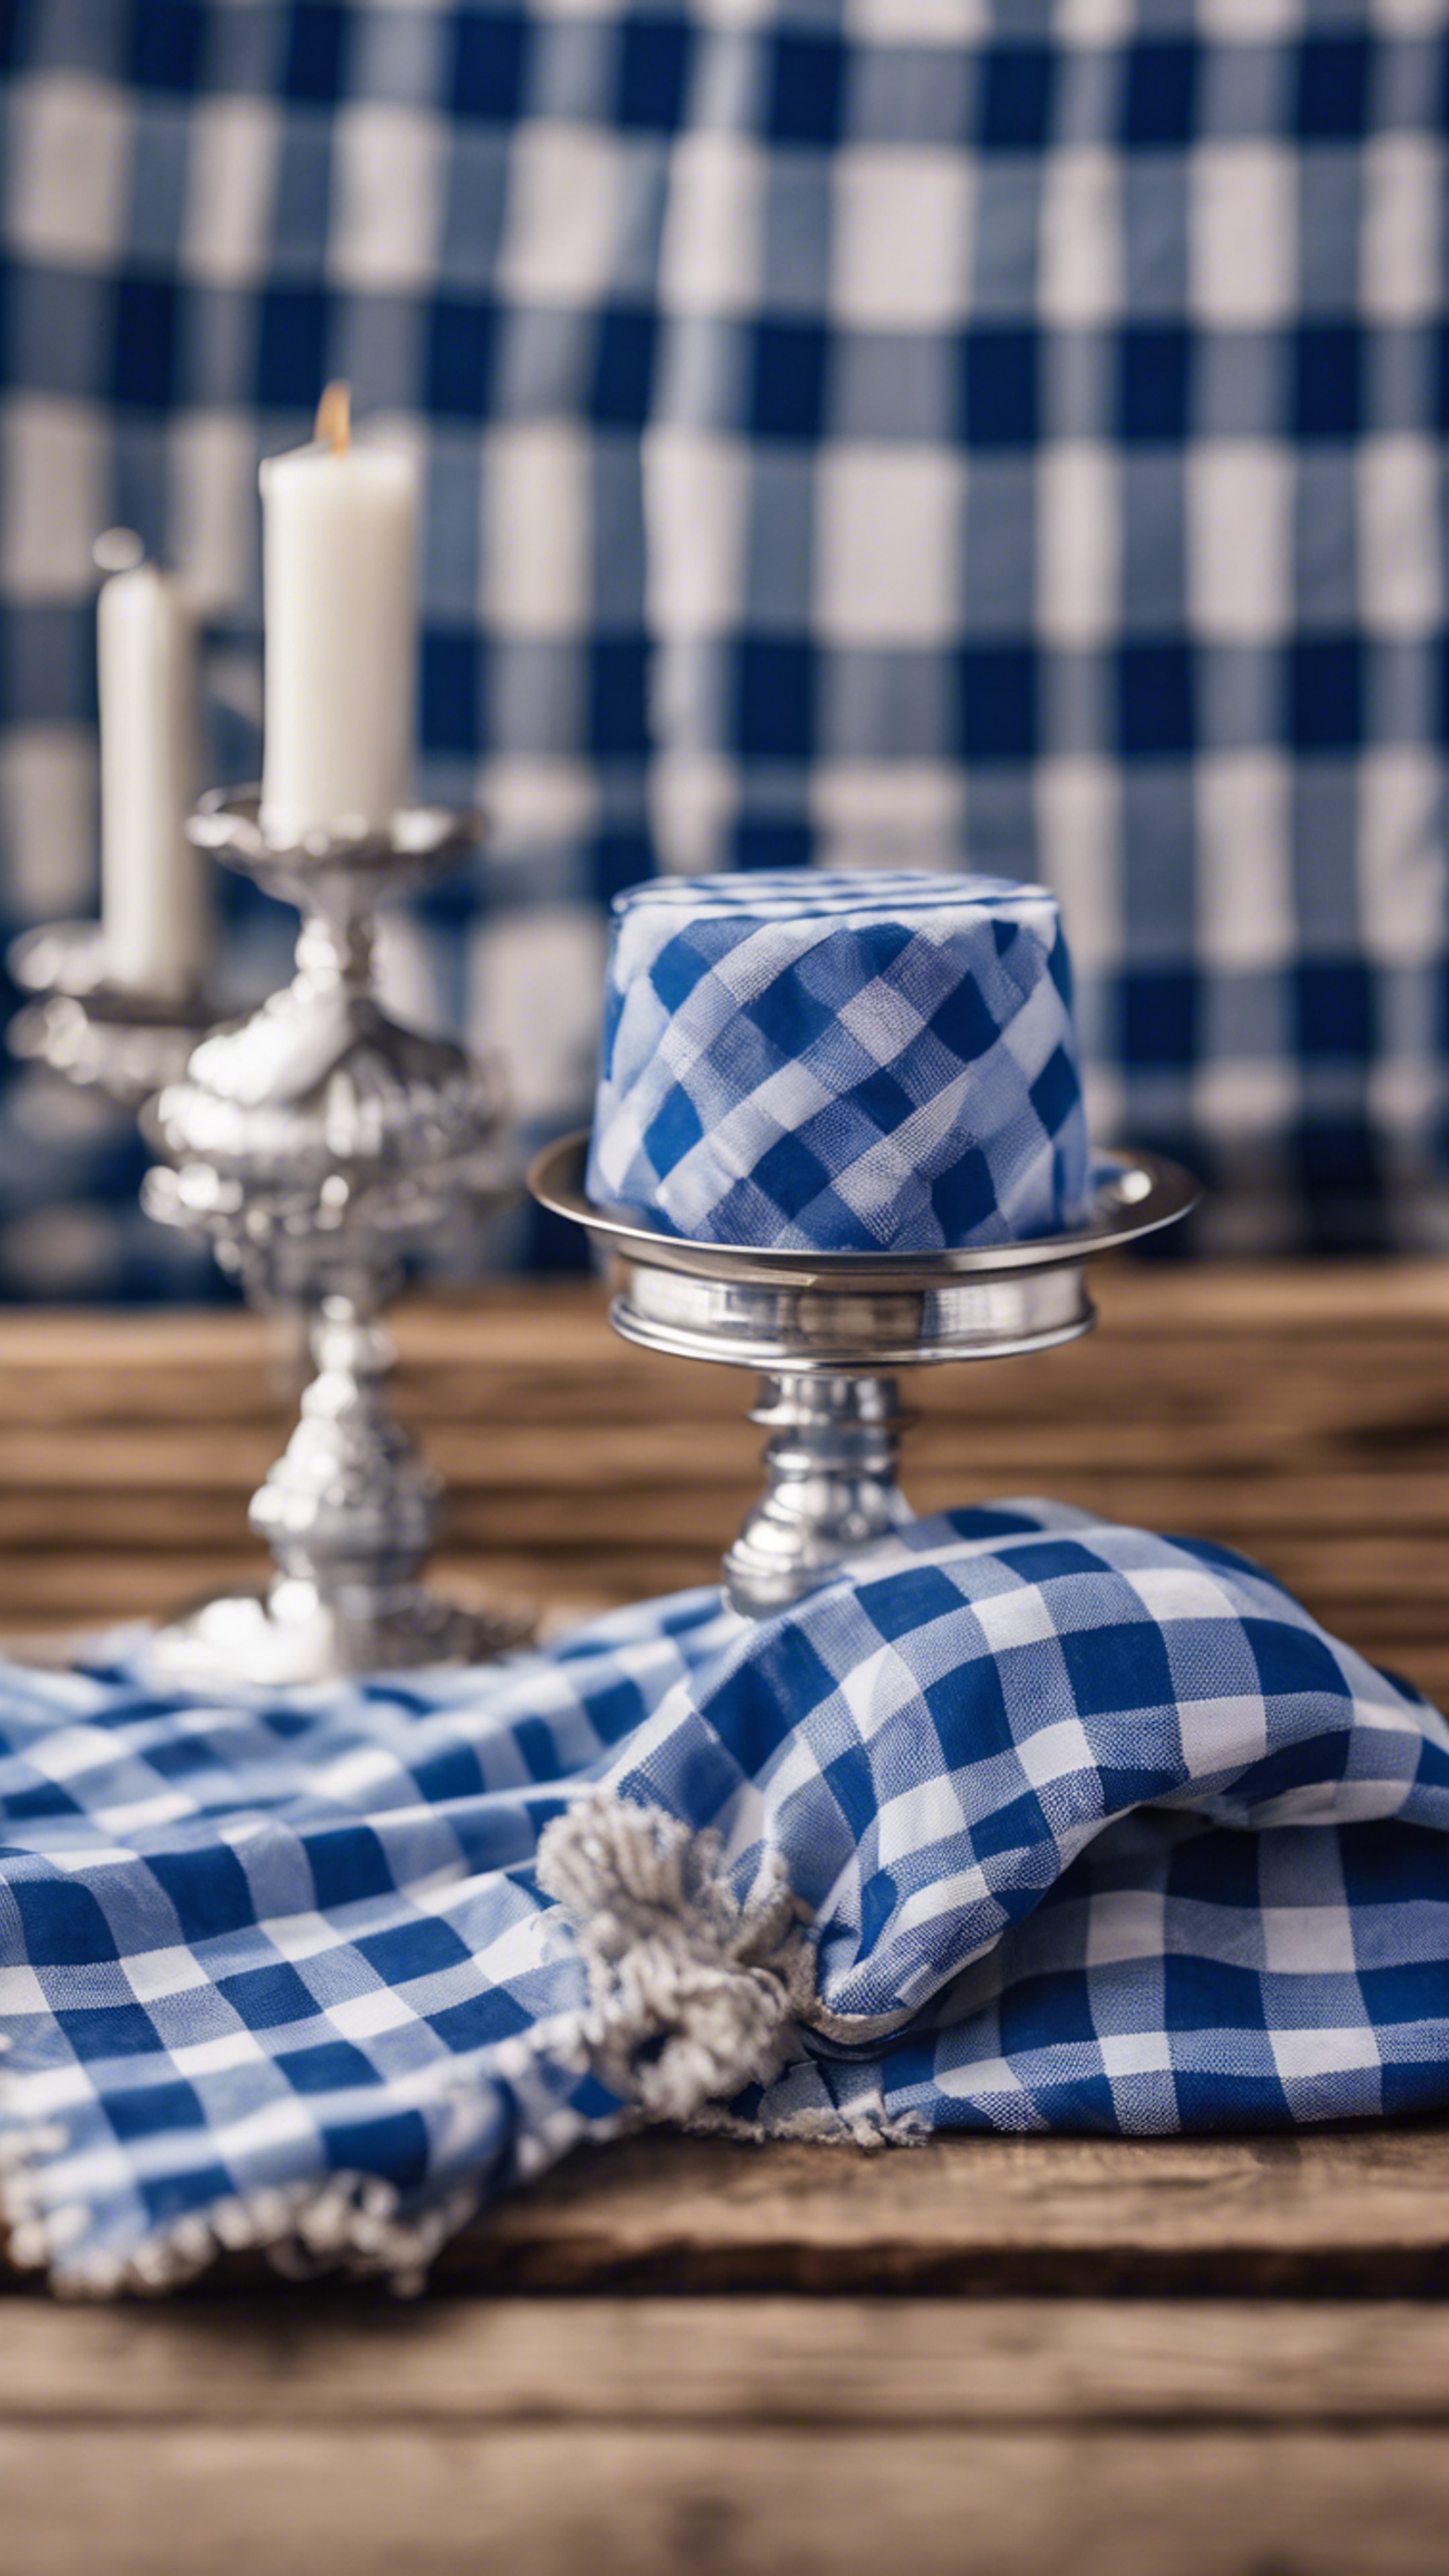 Classic blue checkered gingham fabric draped over a wooden table with a silver candelabra, evoking a preppy picnic scene. Hintergrund[5483729deeeb4e2a9f91]